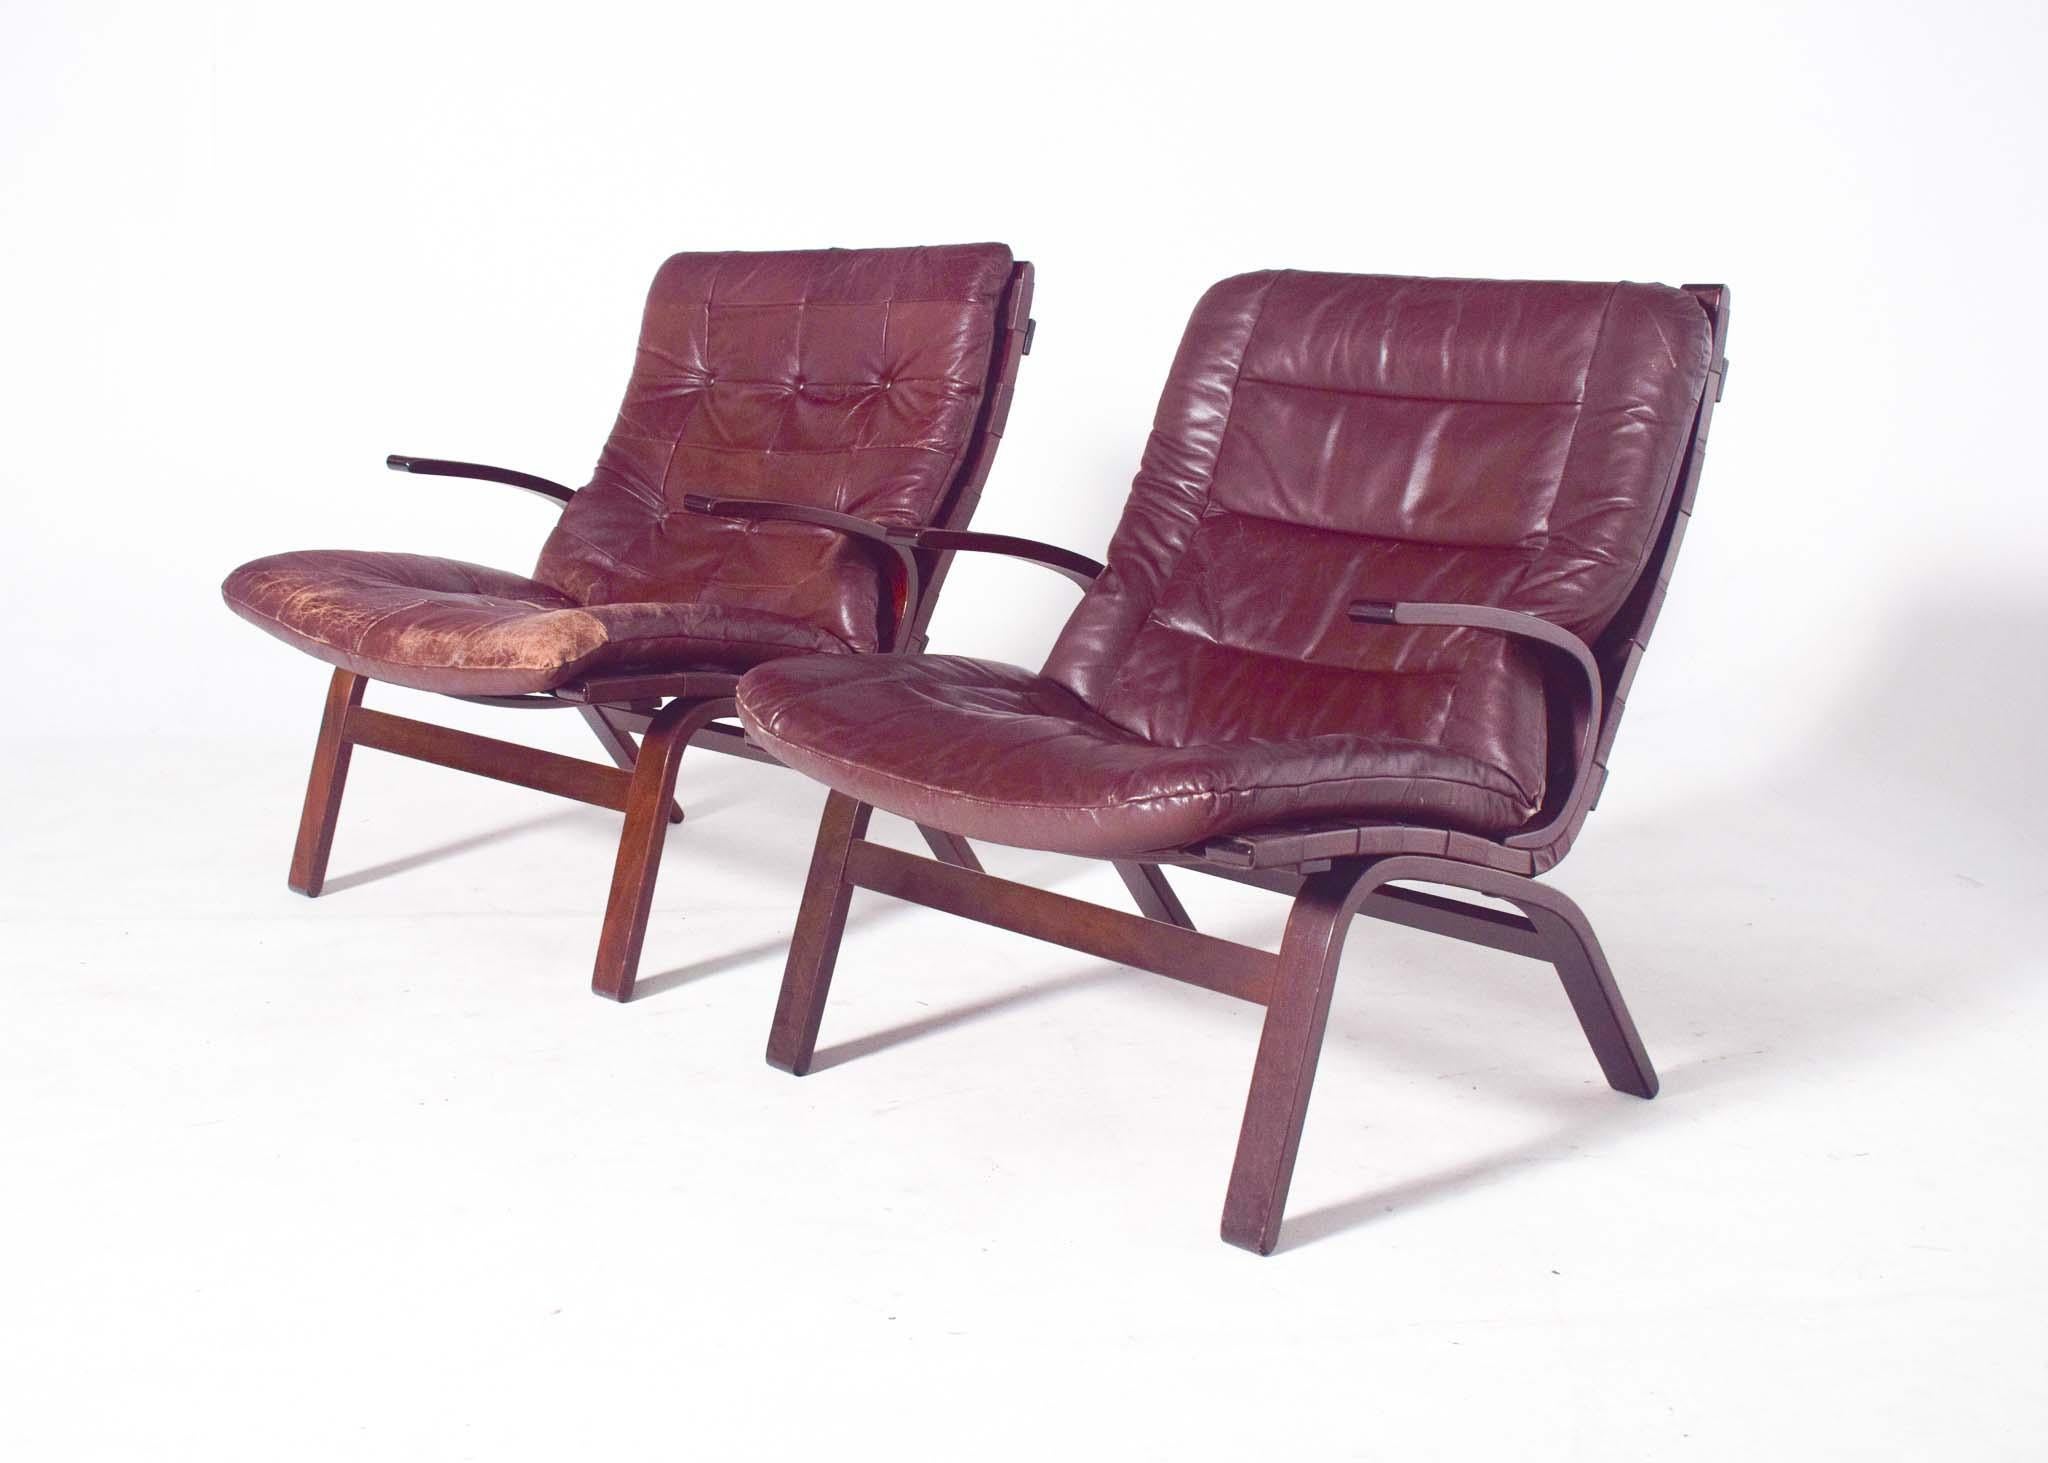 Pair of Miljo Range armchairs, brown leather cushions on beech plywood frame, 1960s. Fantastic chairs with curved wooden frame with armrests and upholstered seat covered in brown leather. Very comfortable due to its construction and the touch of